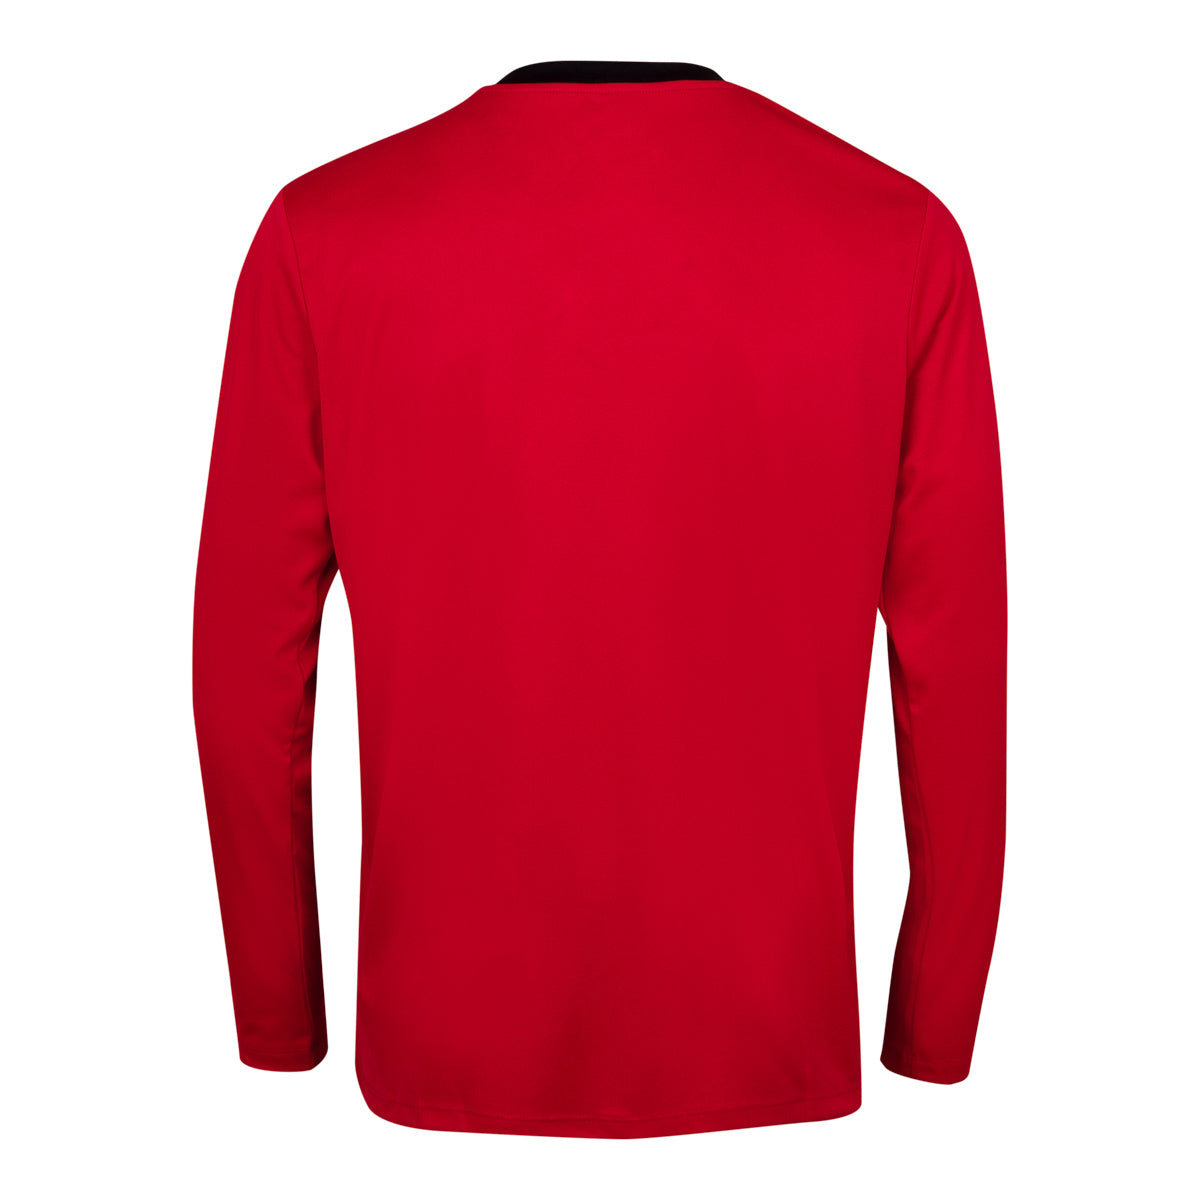 Maillot Football Caserne Rouge Homme - Image 2